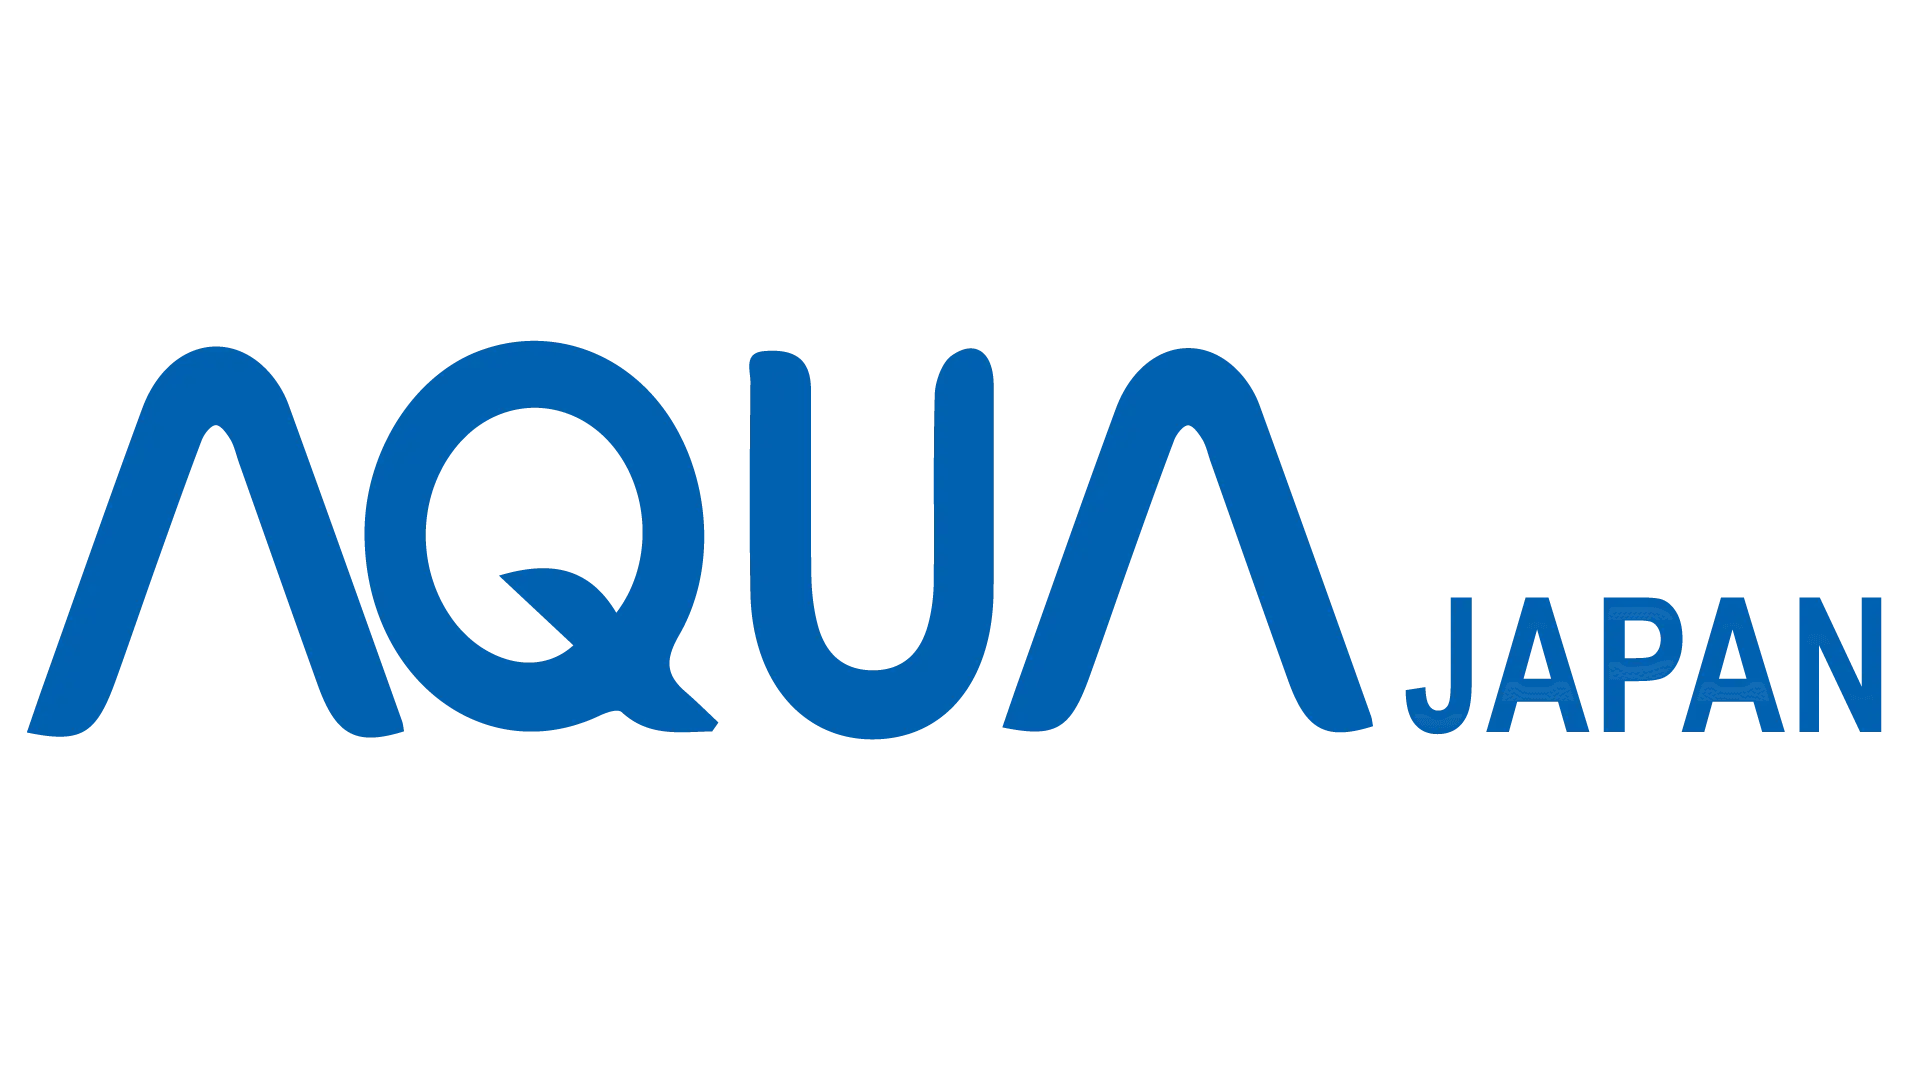 Chatbot in the electronics industry owned by Aqua Japan company